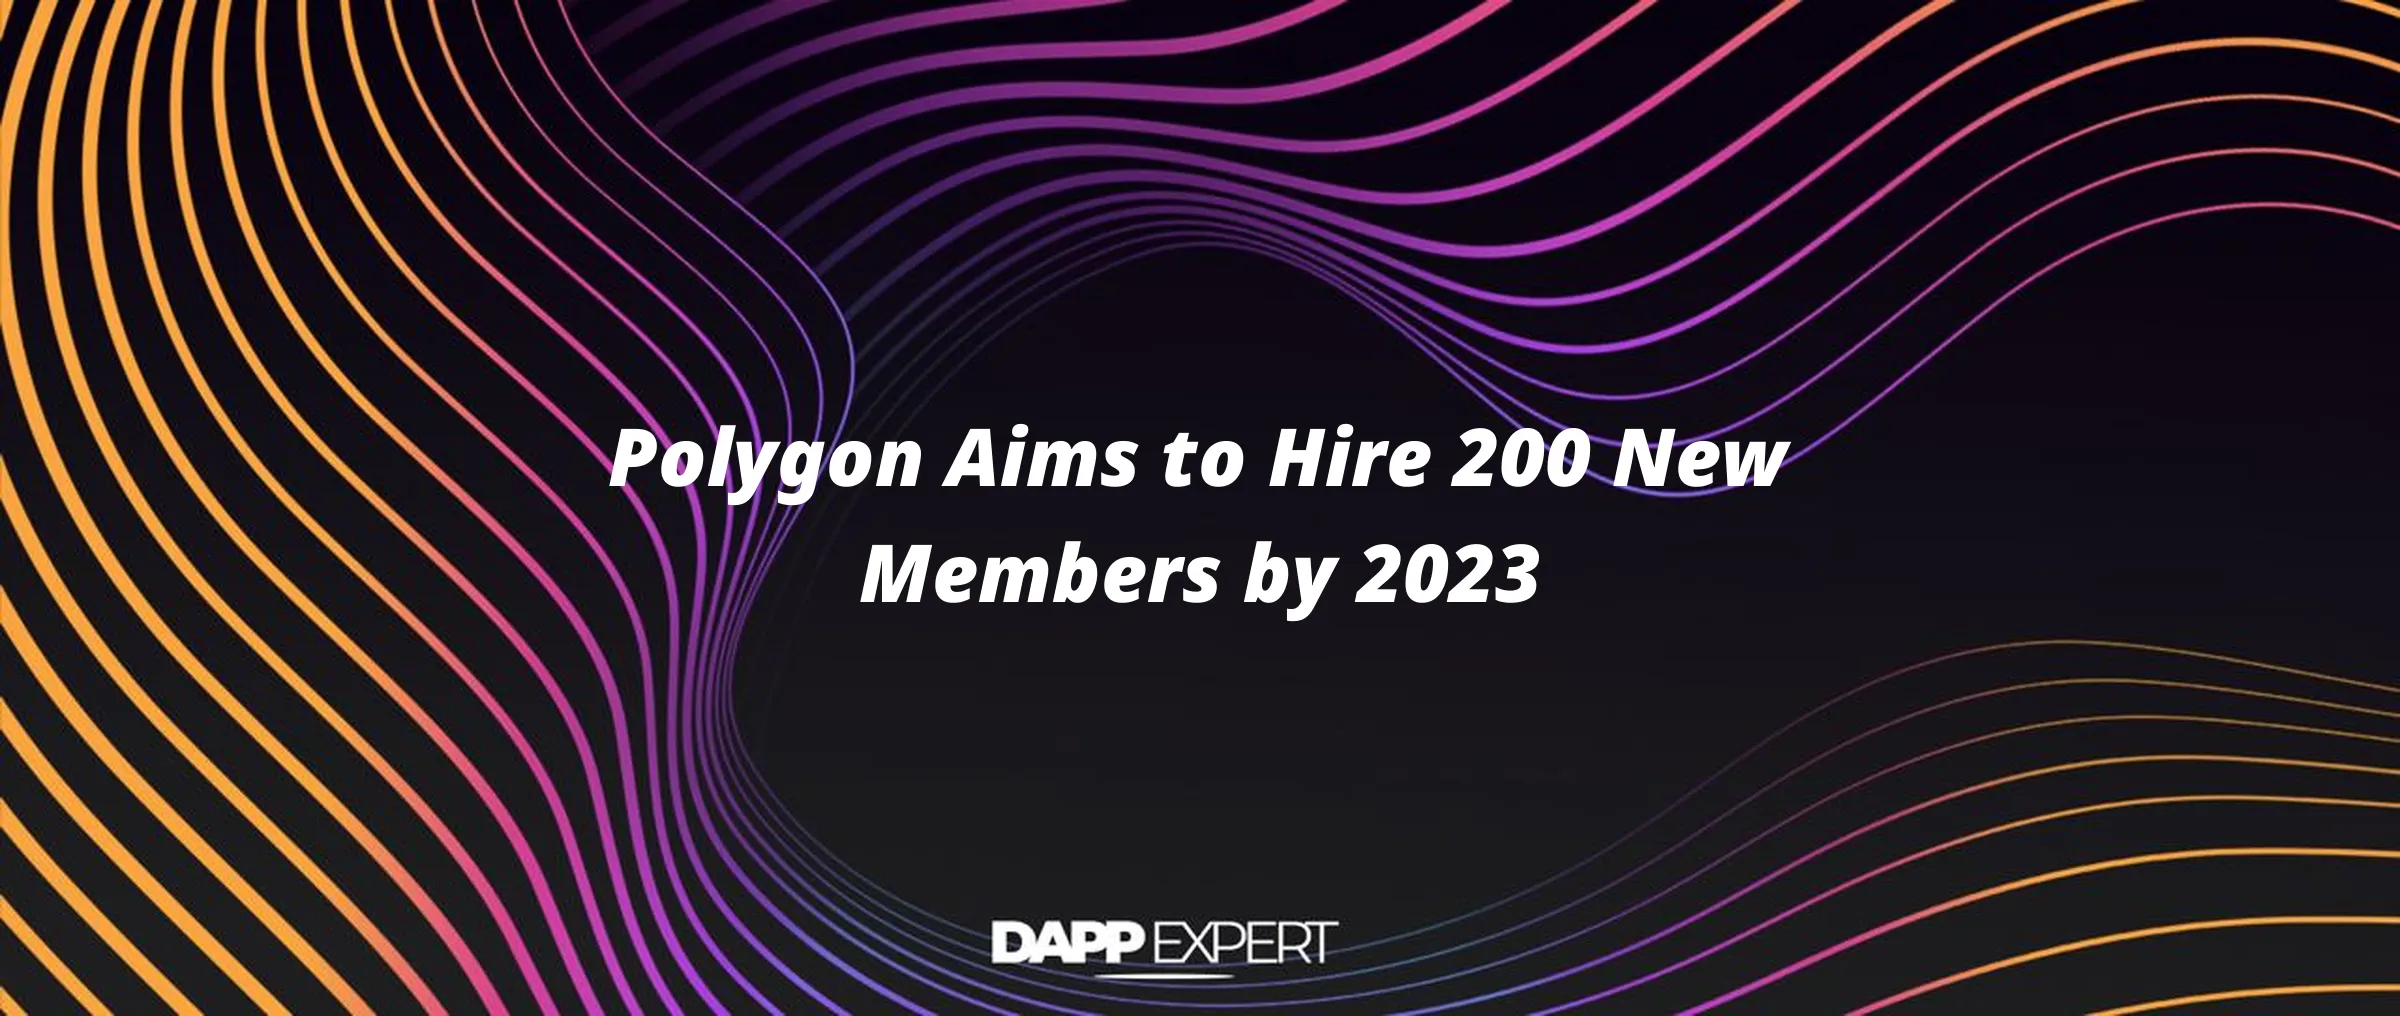 Polygon Aims to Hire 200 New Members by 2023